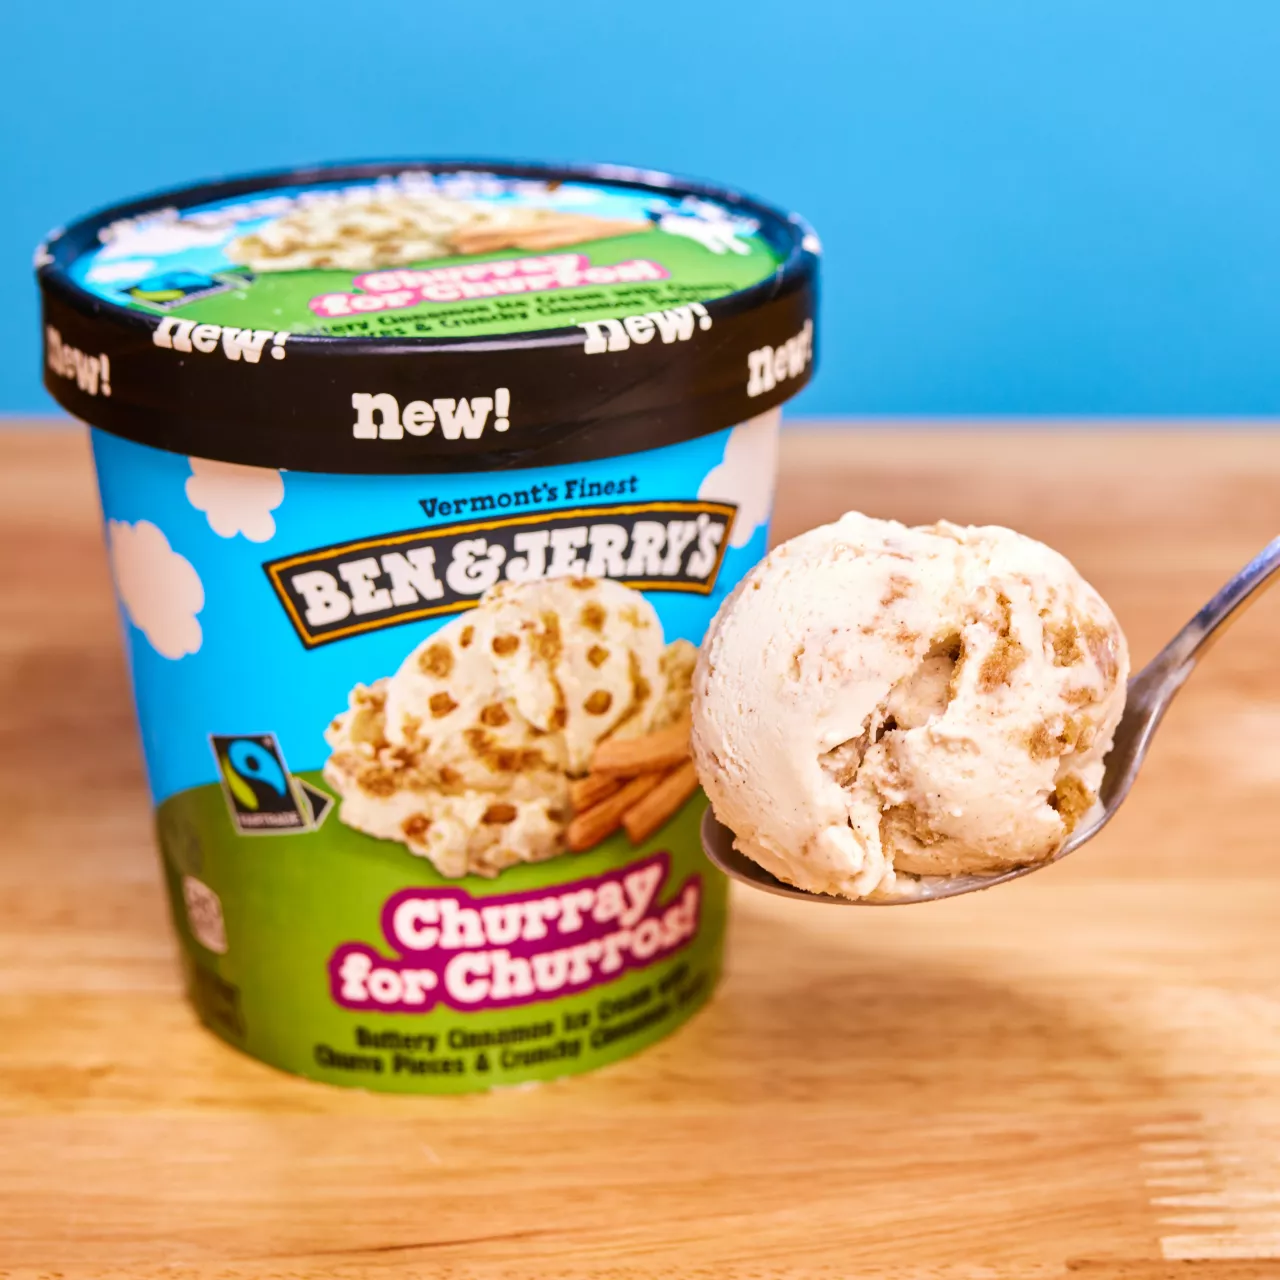 Ben & Jerry's latest ice cream innovation, Churray for Churros™, celebrates all the best components of a churro: crunchy buttery texture, cinnamon, and sugar. The result is a perfect translation from the hot, fried cinnamon sprinkled baked good experience into a decadent ice cream. img#2